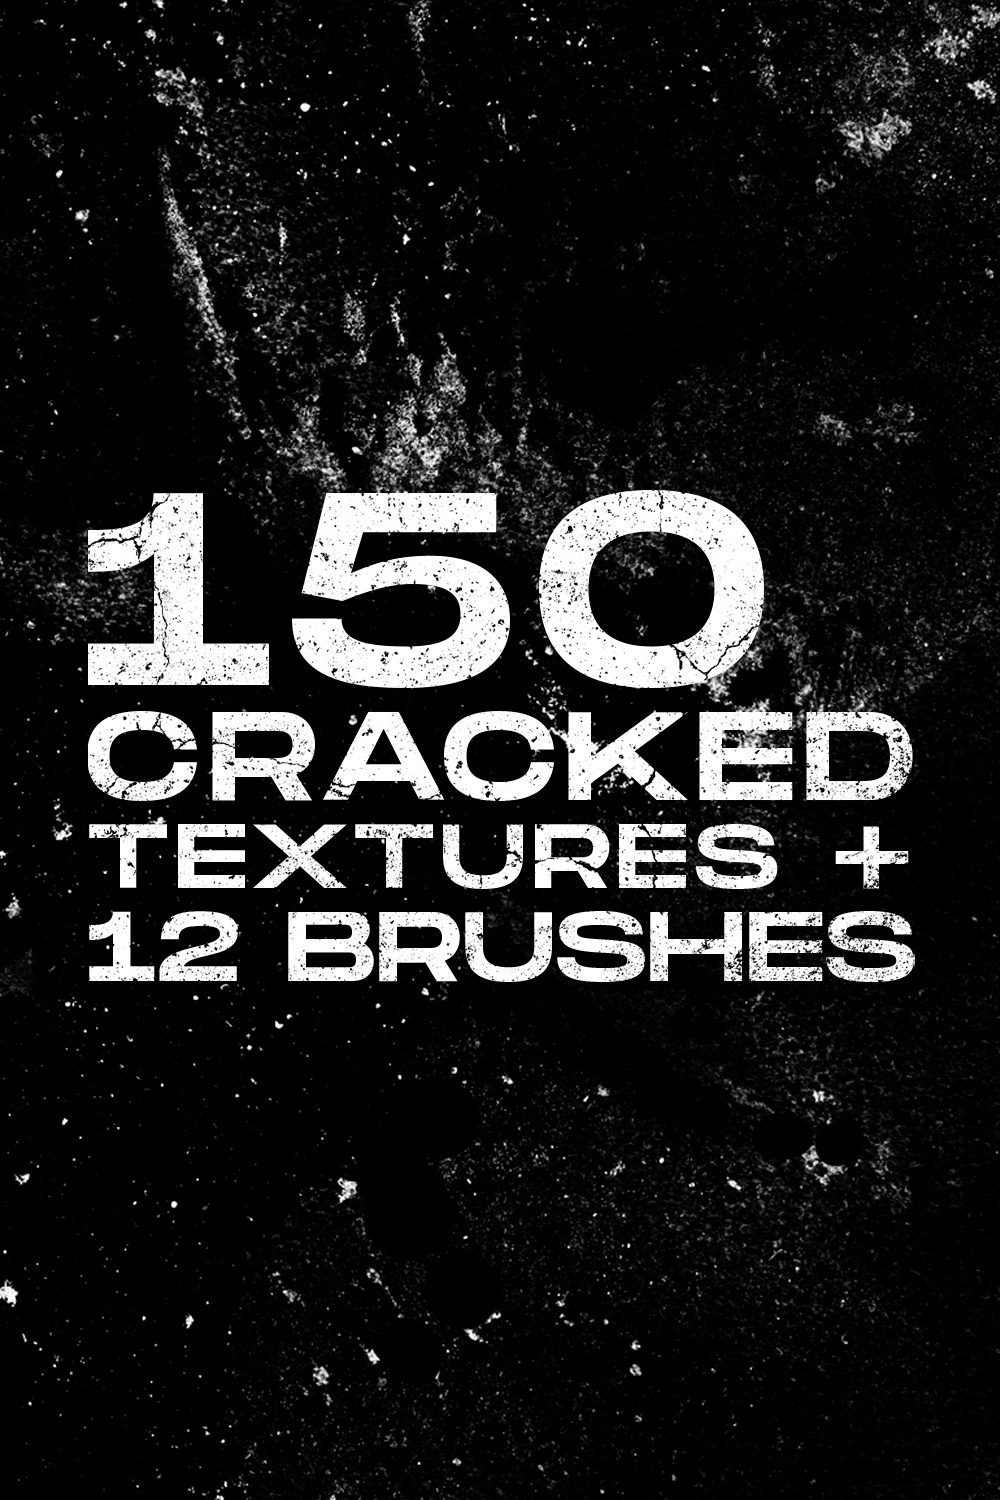 Cracked & Distressed Textures pinterest image.